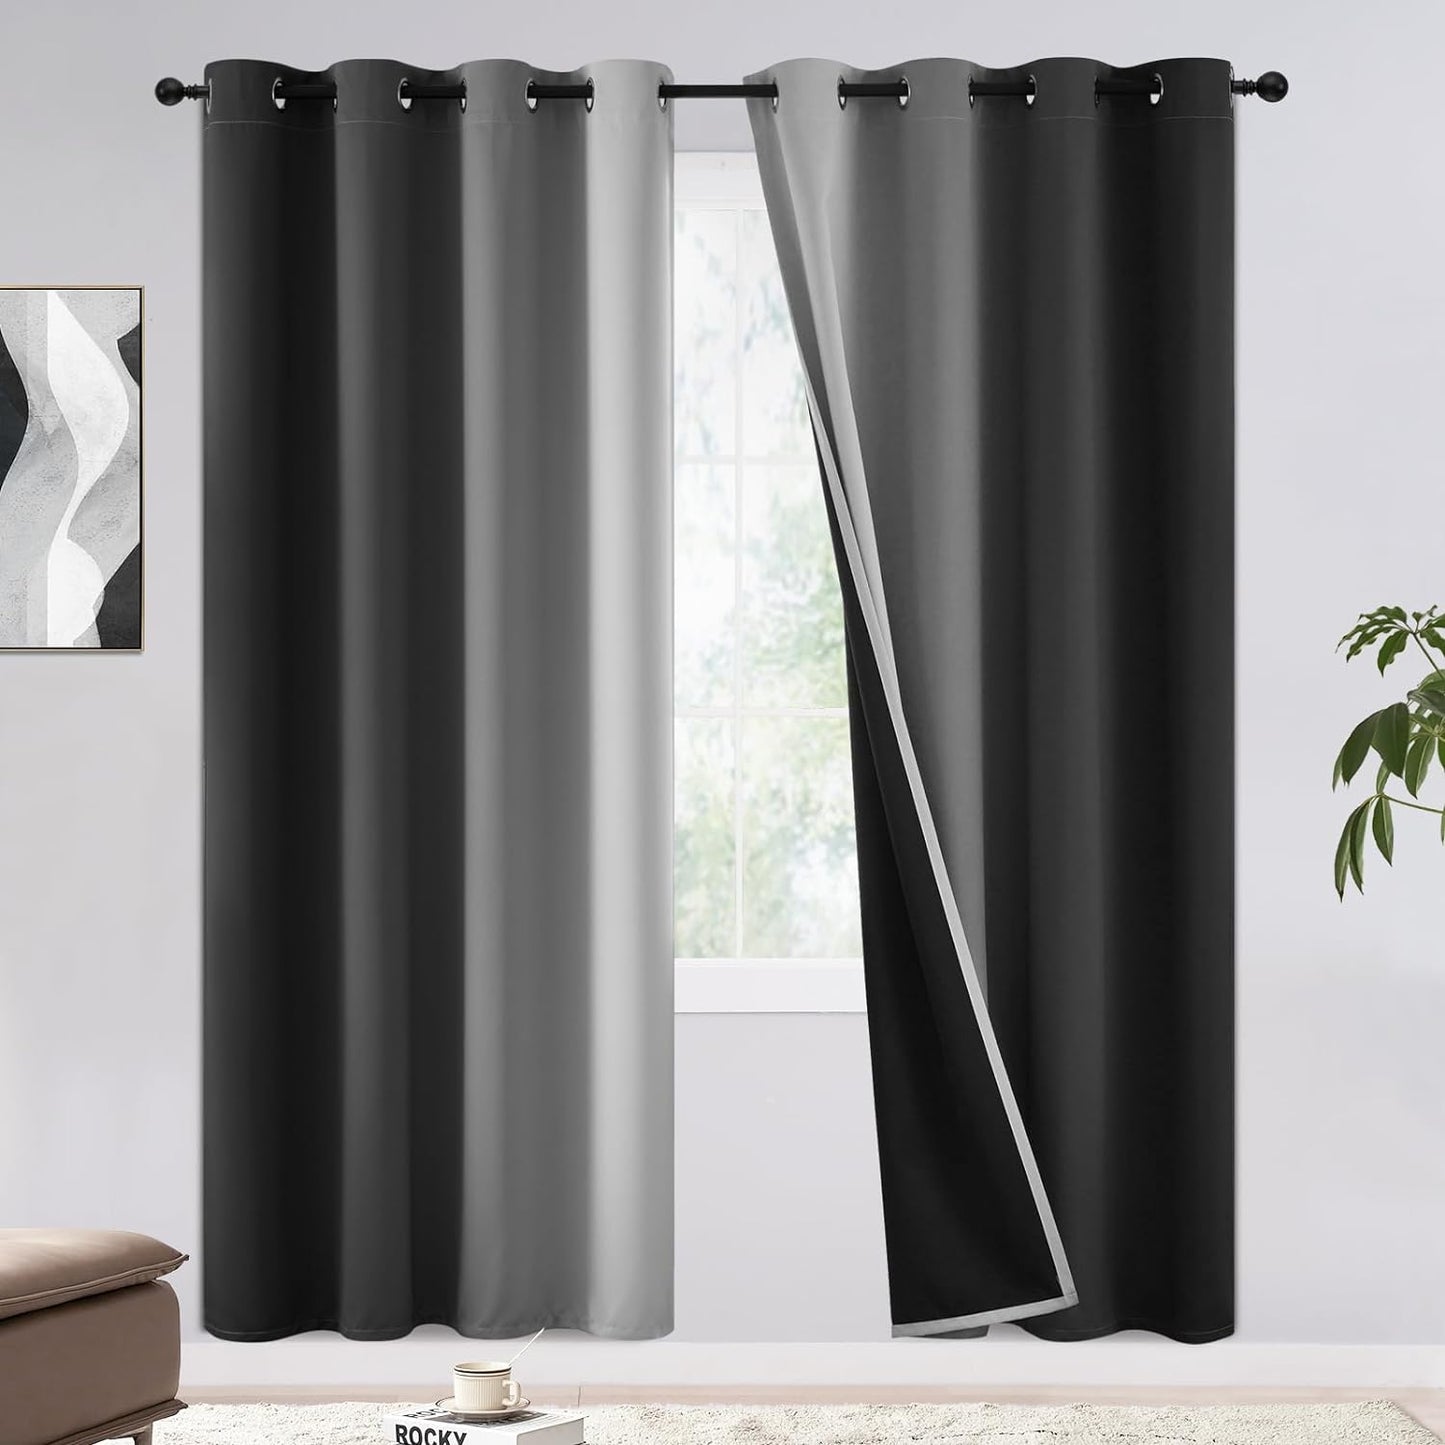 COSVIYA 100% Blackout Curtains & Drapes Ombre Purple Curtains 63 Inch Length 2 Panels,Full Room Darkening Grommet Gradient Insulated Thermal Window Curtains for Bedroom/Living Room,52X63 Inches  COSVIYA Black To Greyish White 52W X 72L 